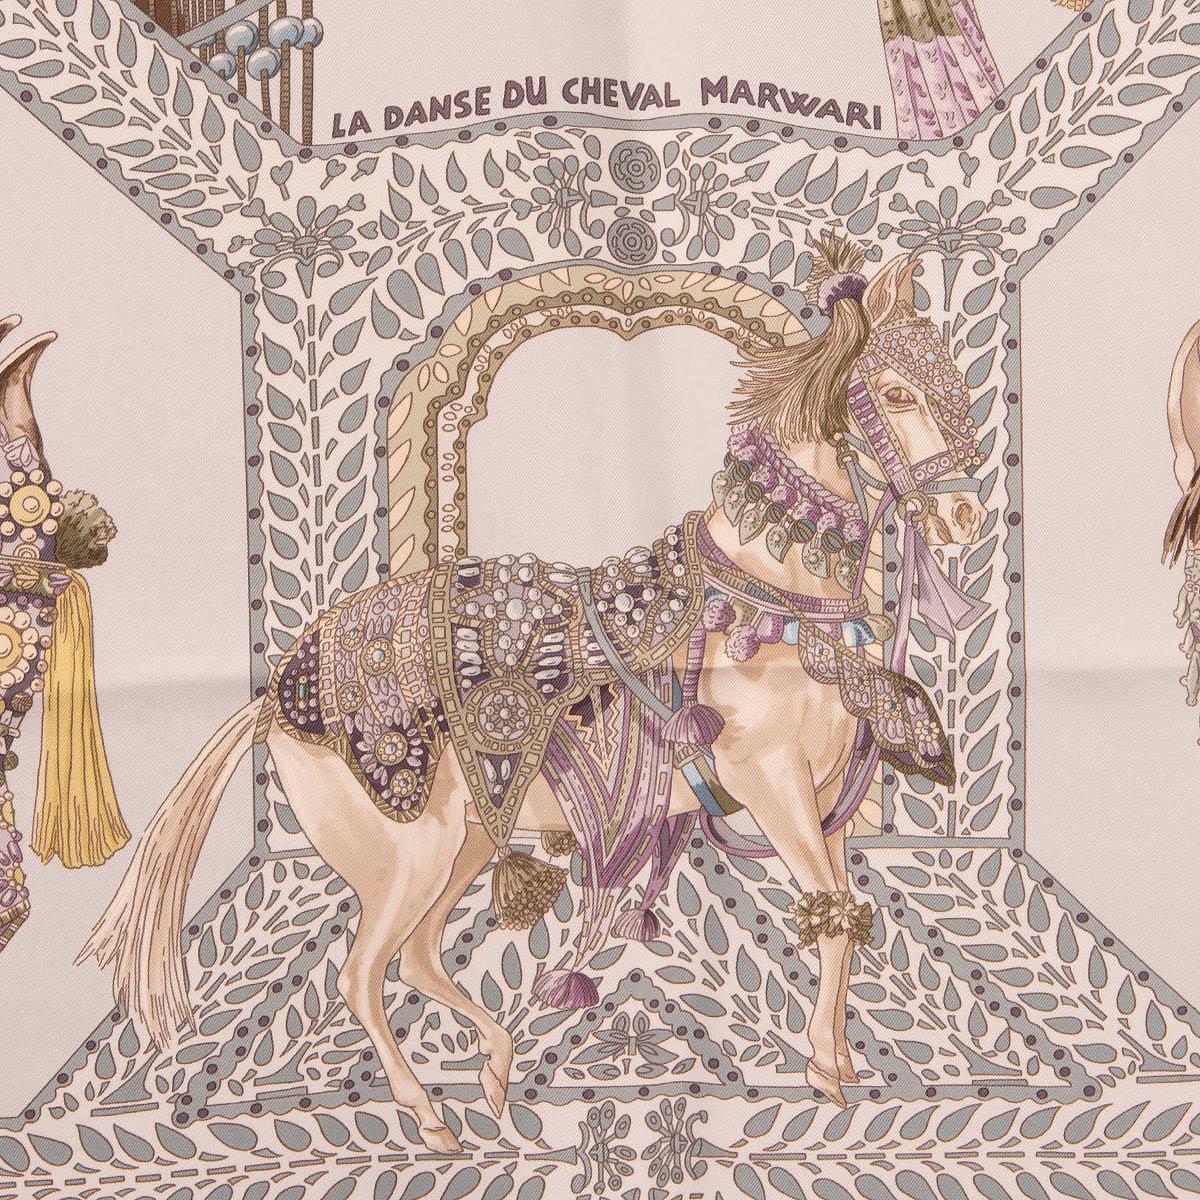 100% authentic Hermès 'La Danse du Cheval Marwari 90' scarf by Annie Faivre in light grey silk twill (100%) with details in khaki, lilac, turquoise and brown. Has been worn and is in excellent condition.

Measurements
Width	90cm (35.1in)
Length	90cm